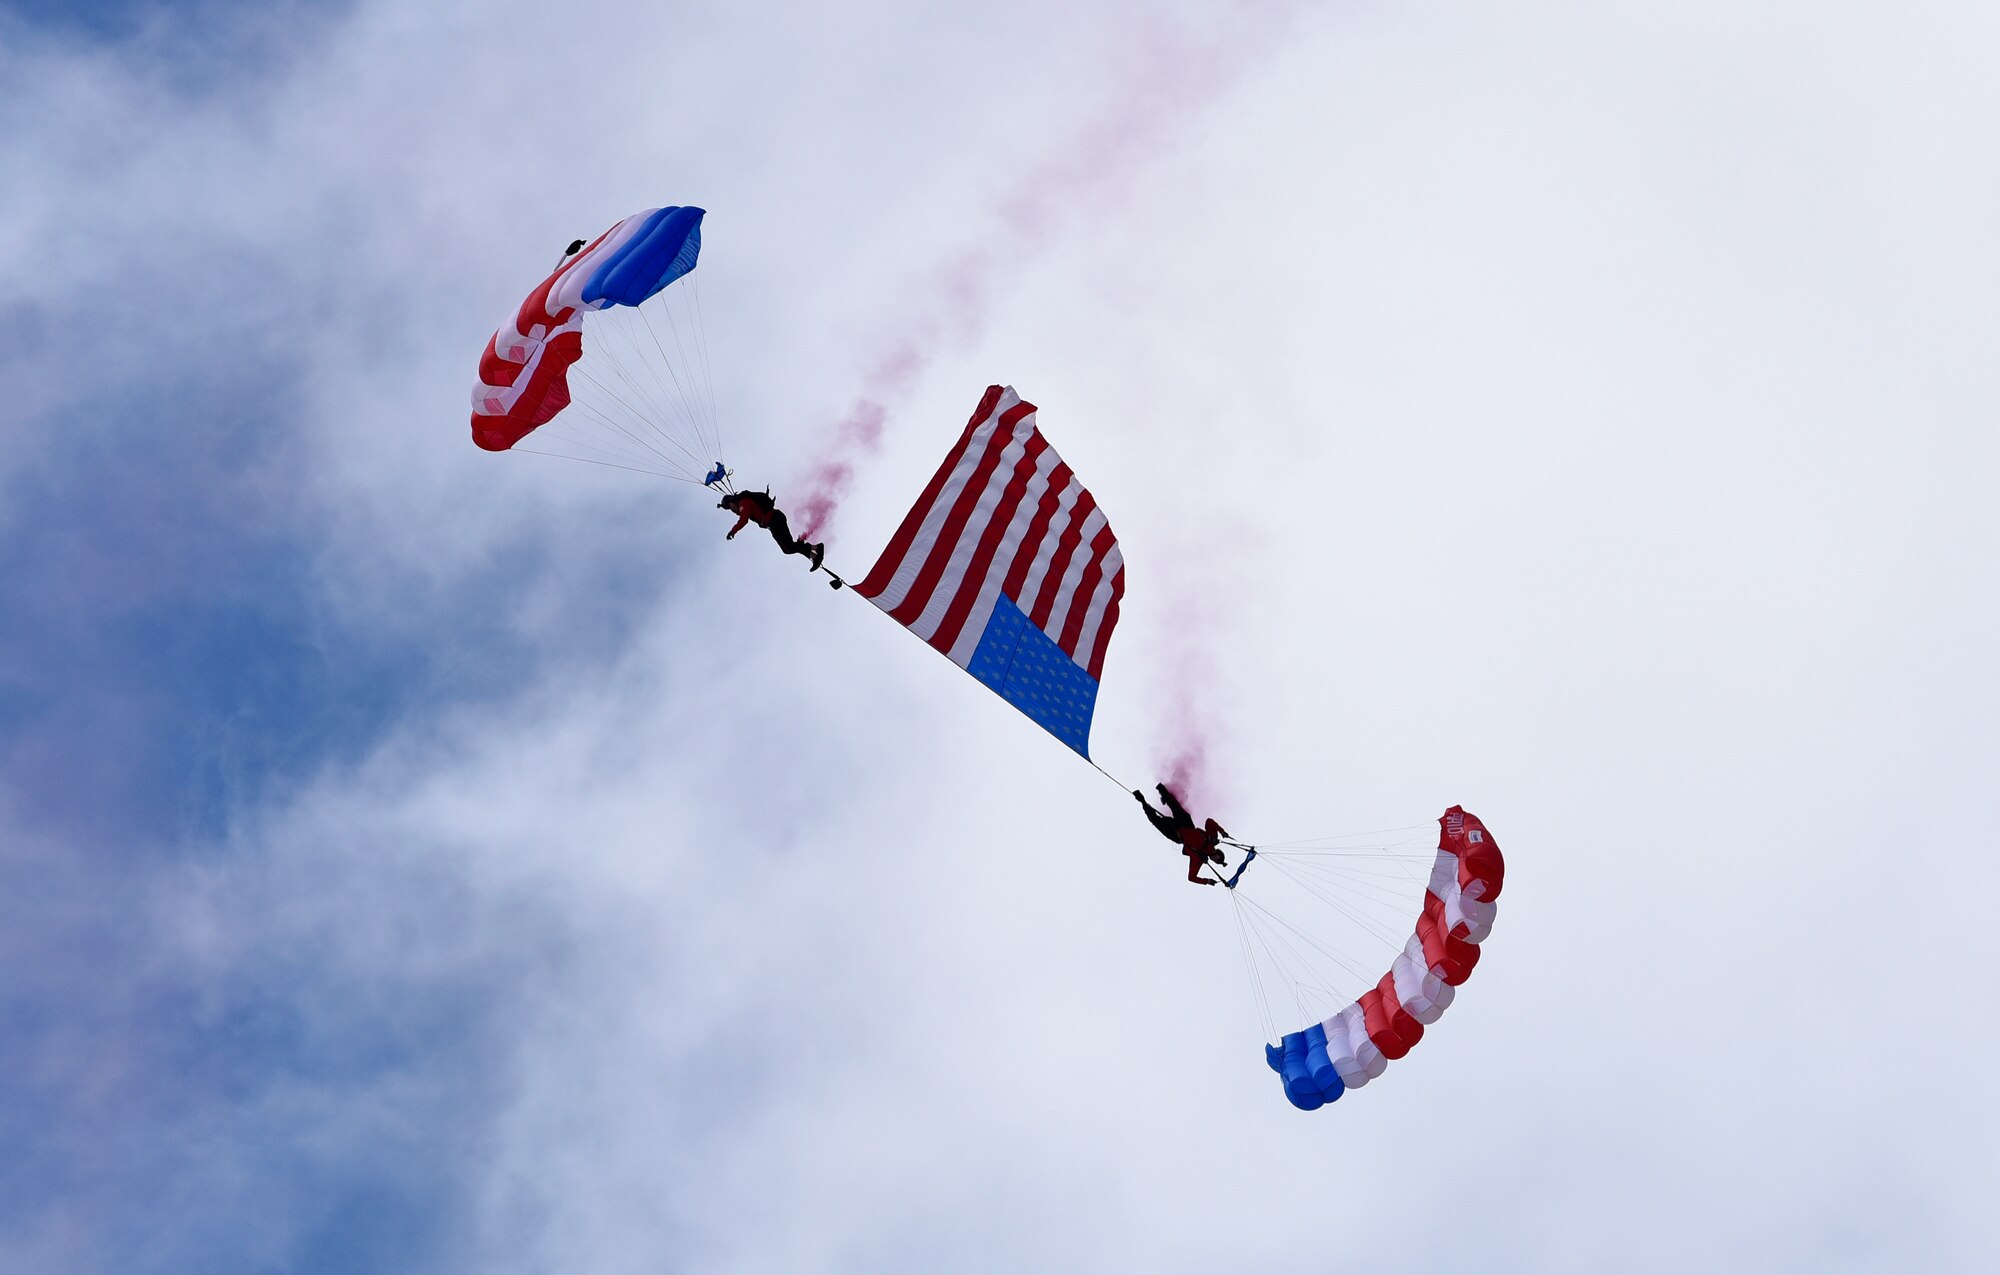 The Patriot Parachute Team performs a skydiving routine at the Frontiers in Flight Open House and Air Show Sept. 9, 2018, at McConnell Air Force Base, Kansas. The team is comprised of five veterans, who learned parachuting from their combat experiences. (U.S. Air Force photo by Airman 1st Class Michaela R. Slanchik)